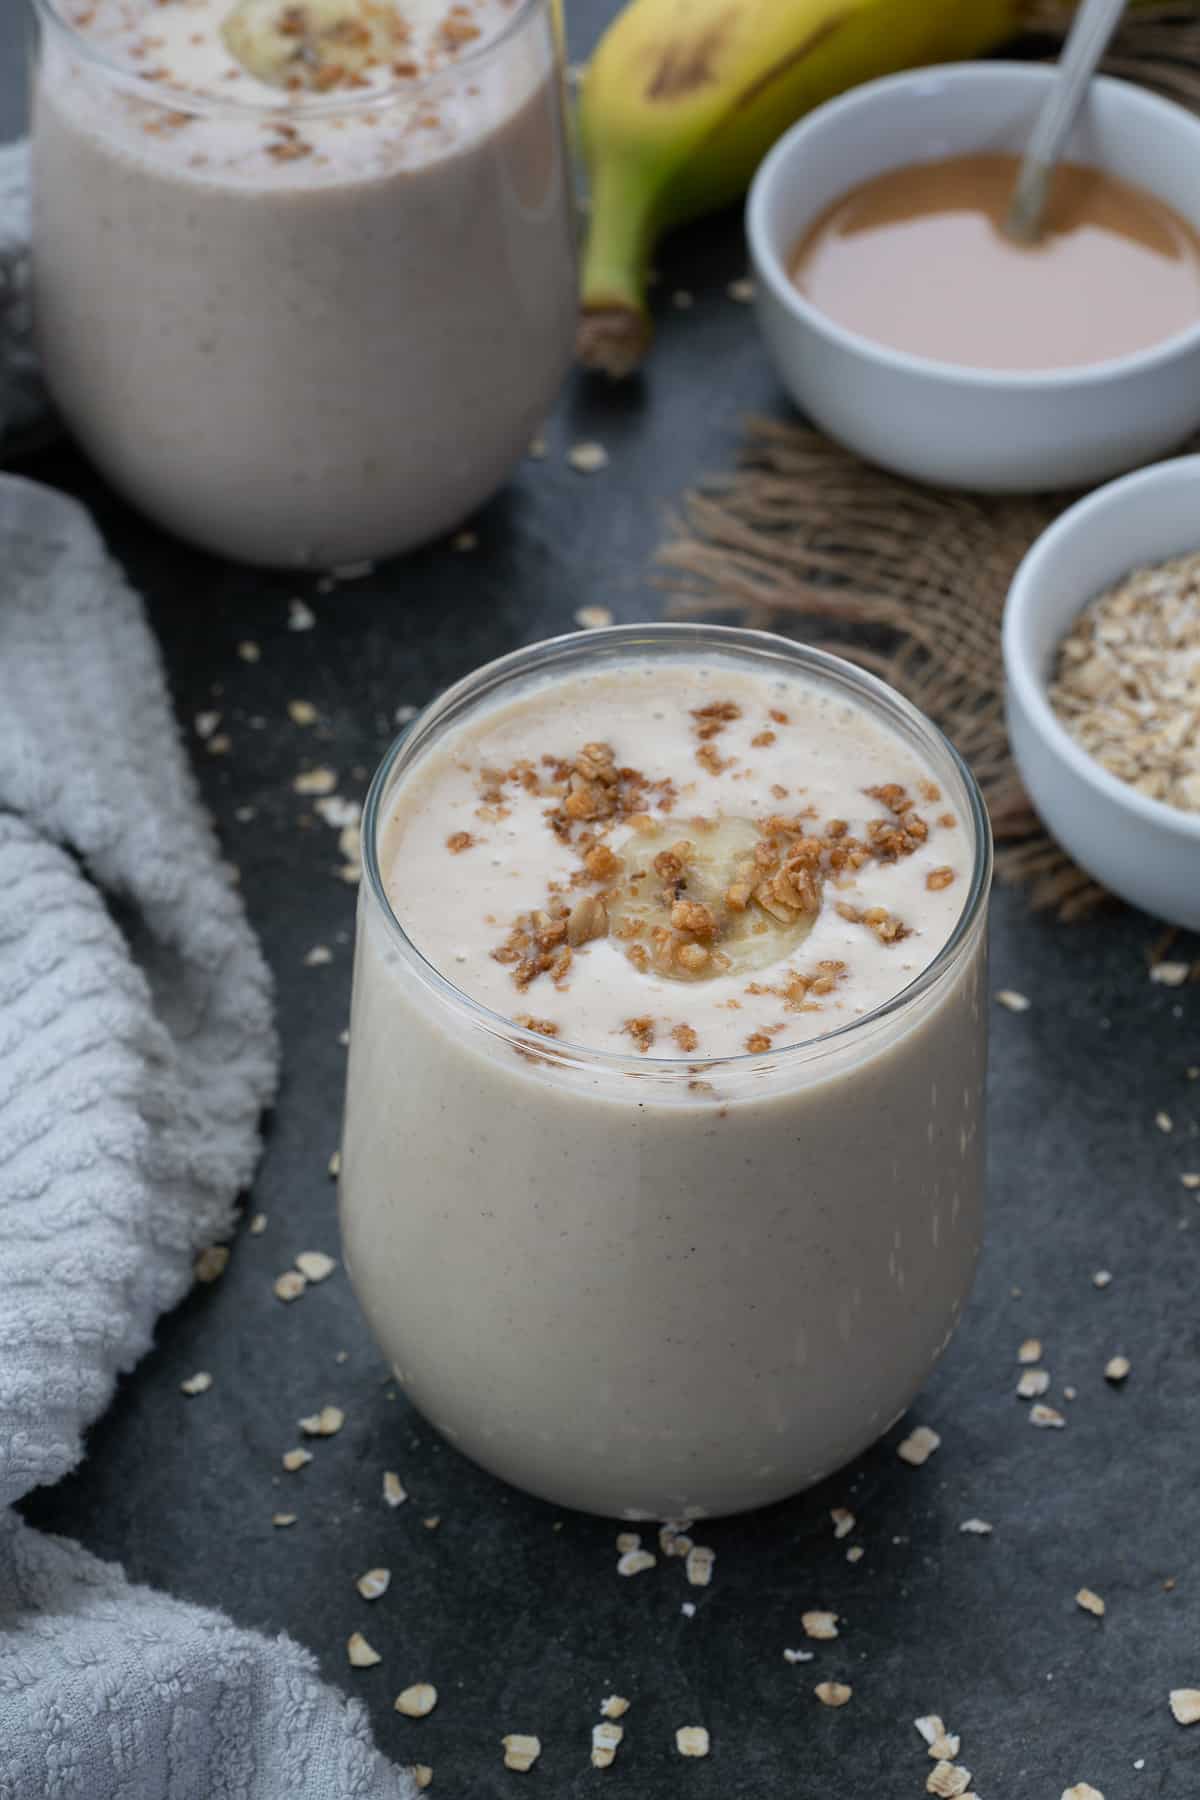 Oatmeal smoothie served in a glass with oatmeal placed in a bowl.